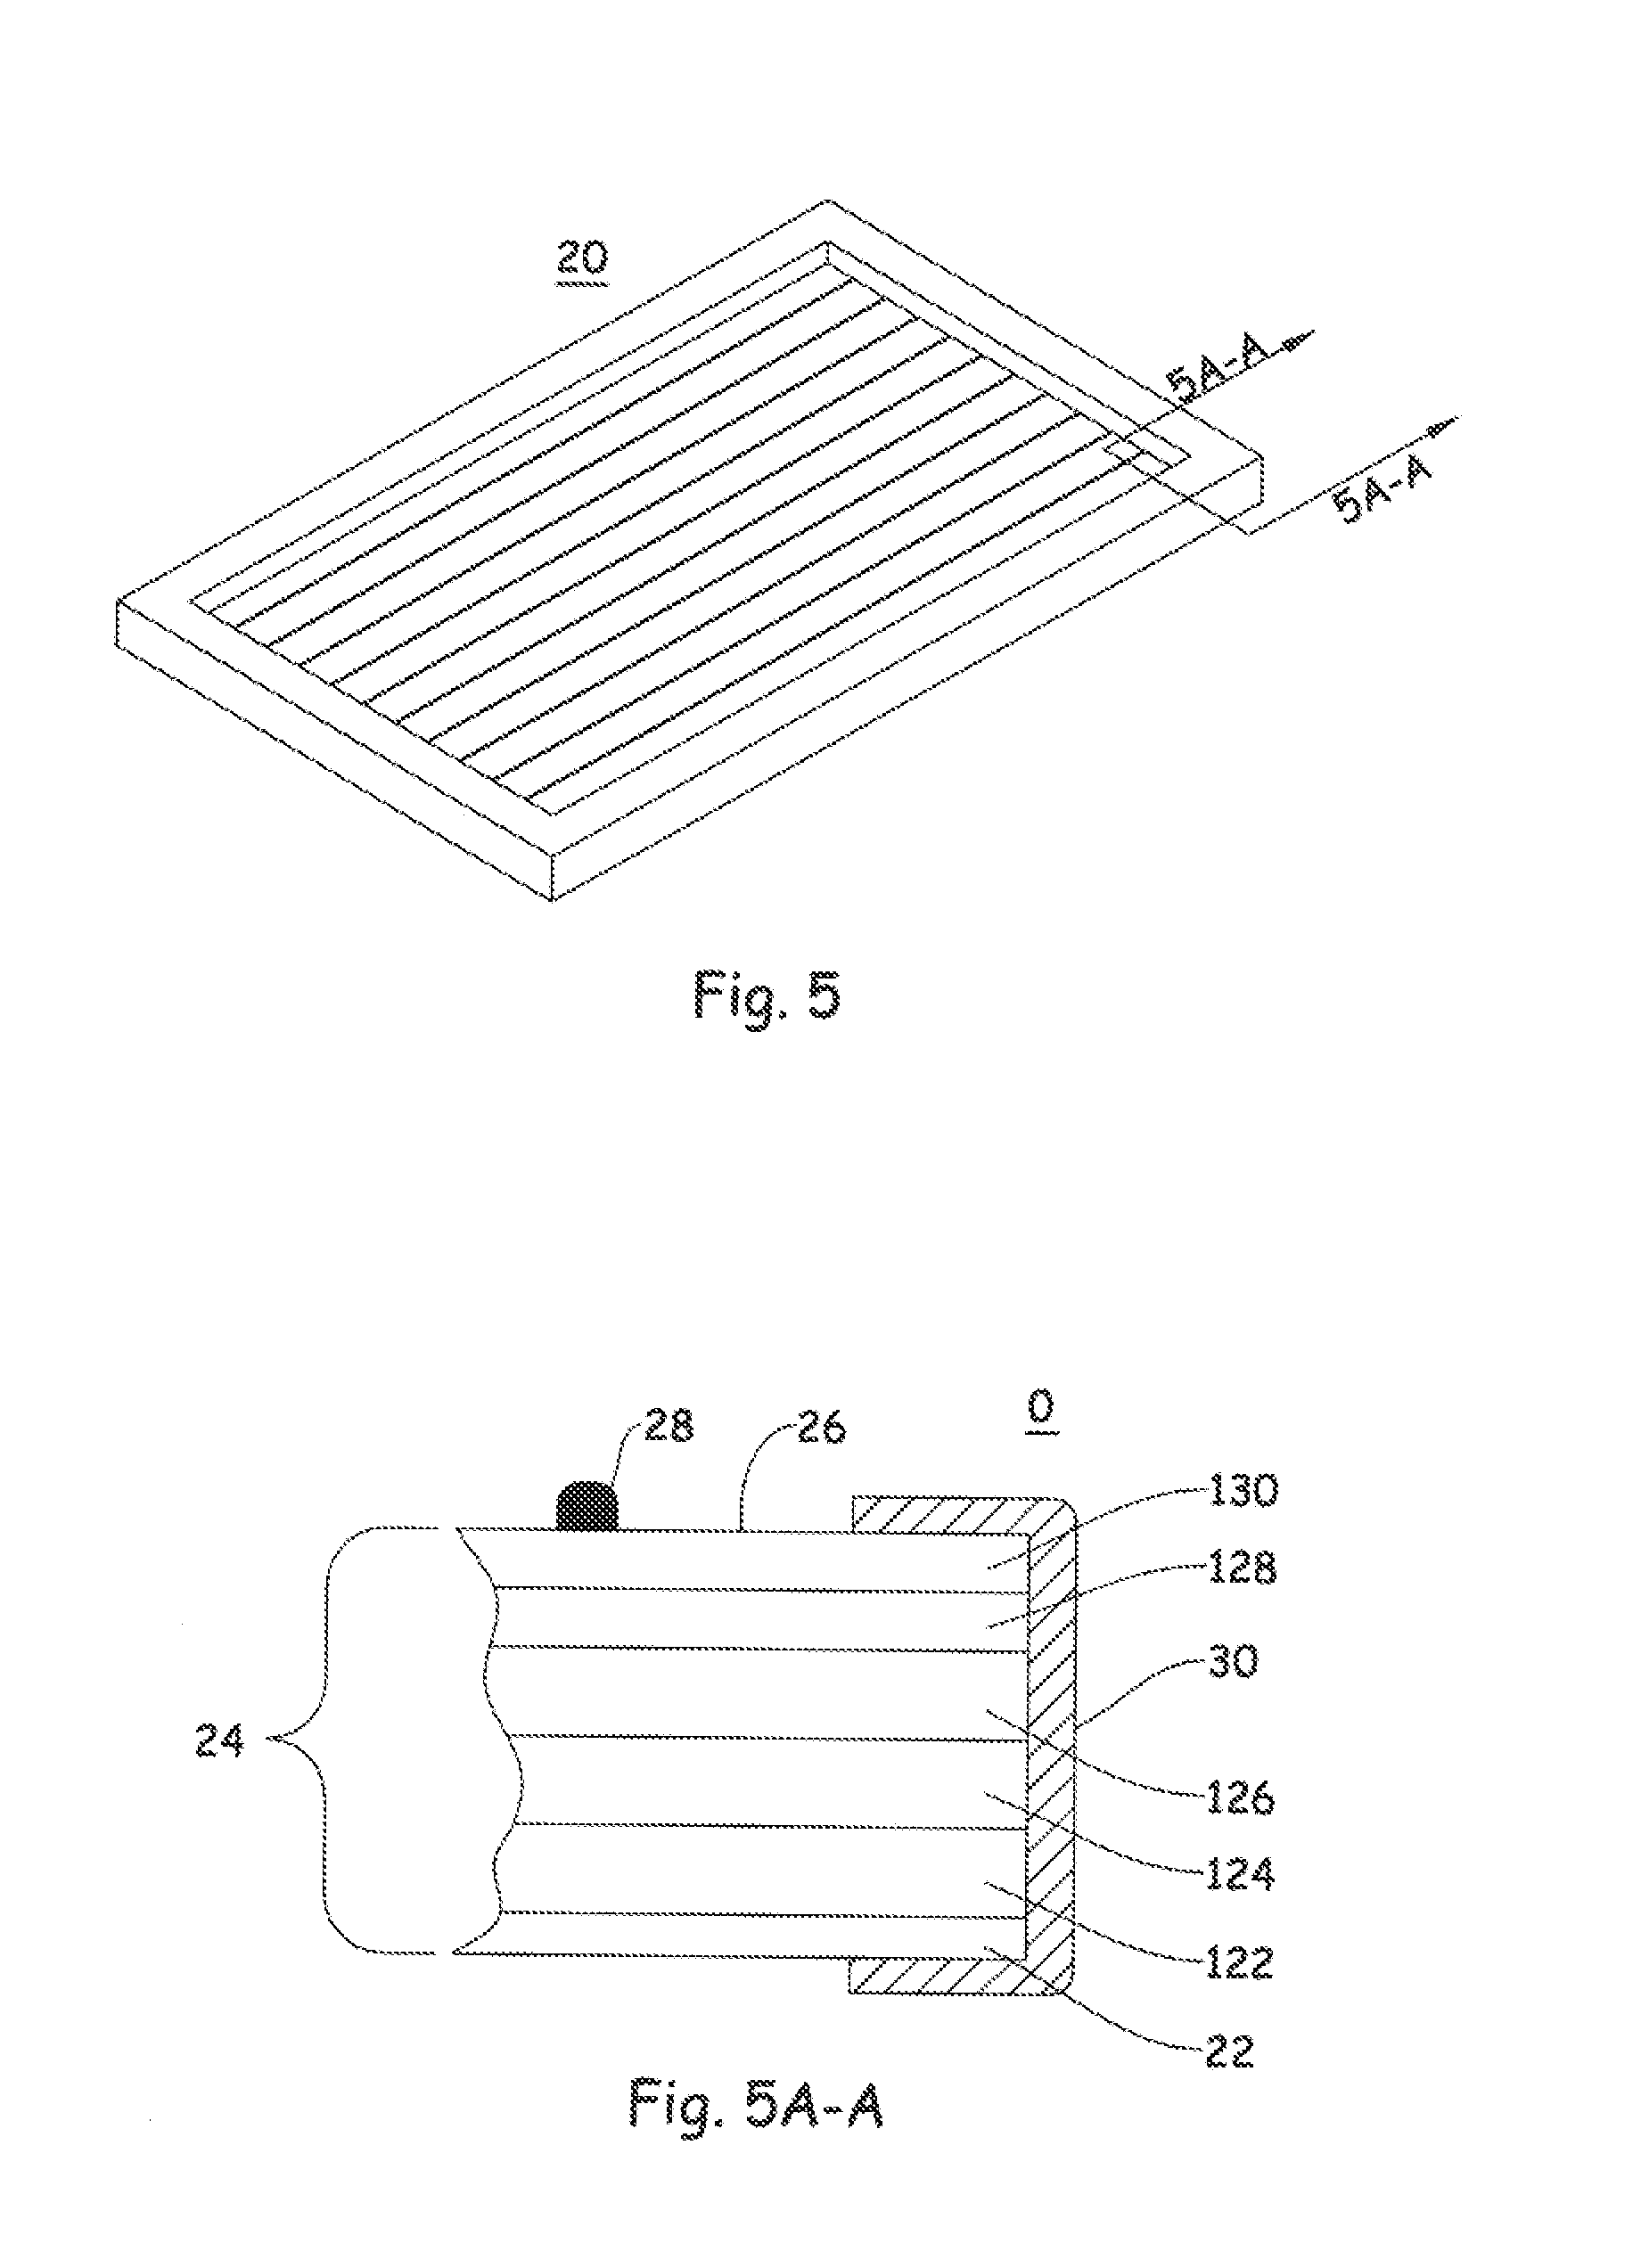 Photovoltaic cell assembly and method